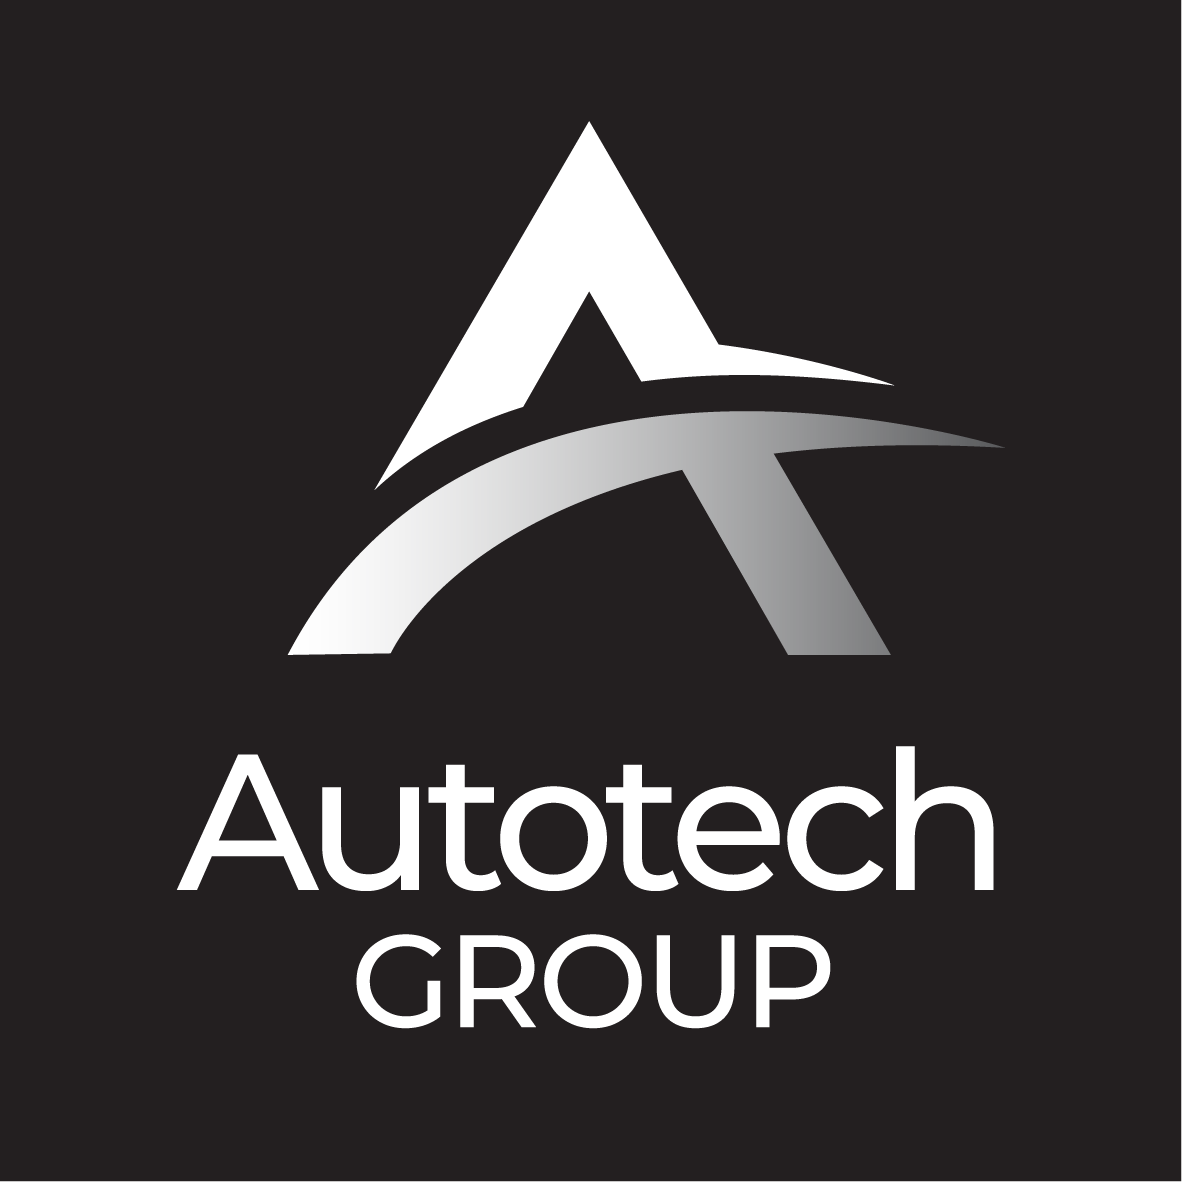 Image of the Autotech Group white and grey logo with text on a black background with the words saying Autotech Group.